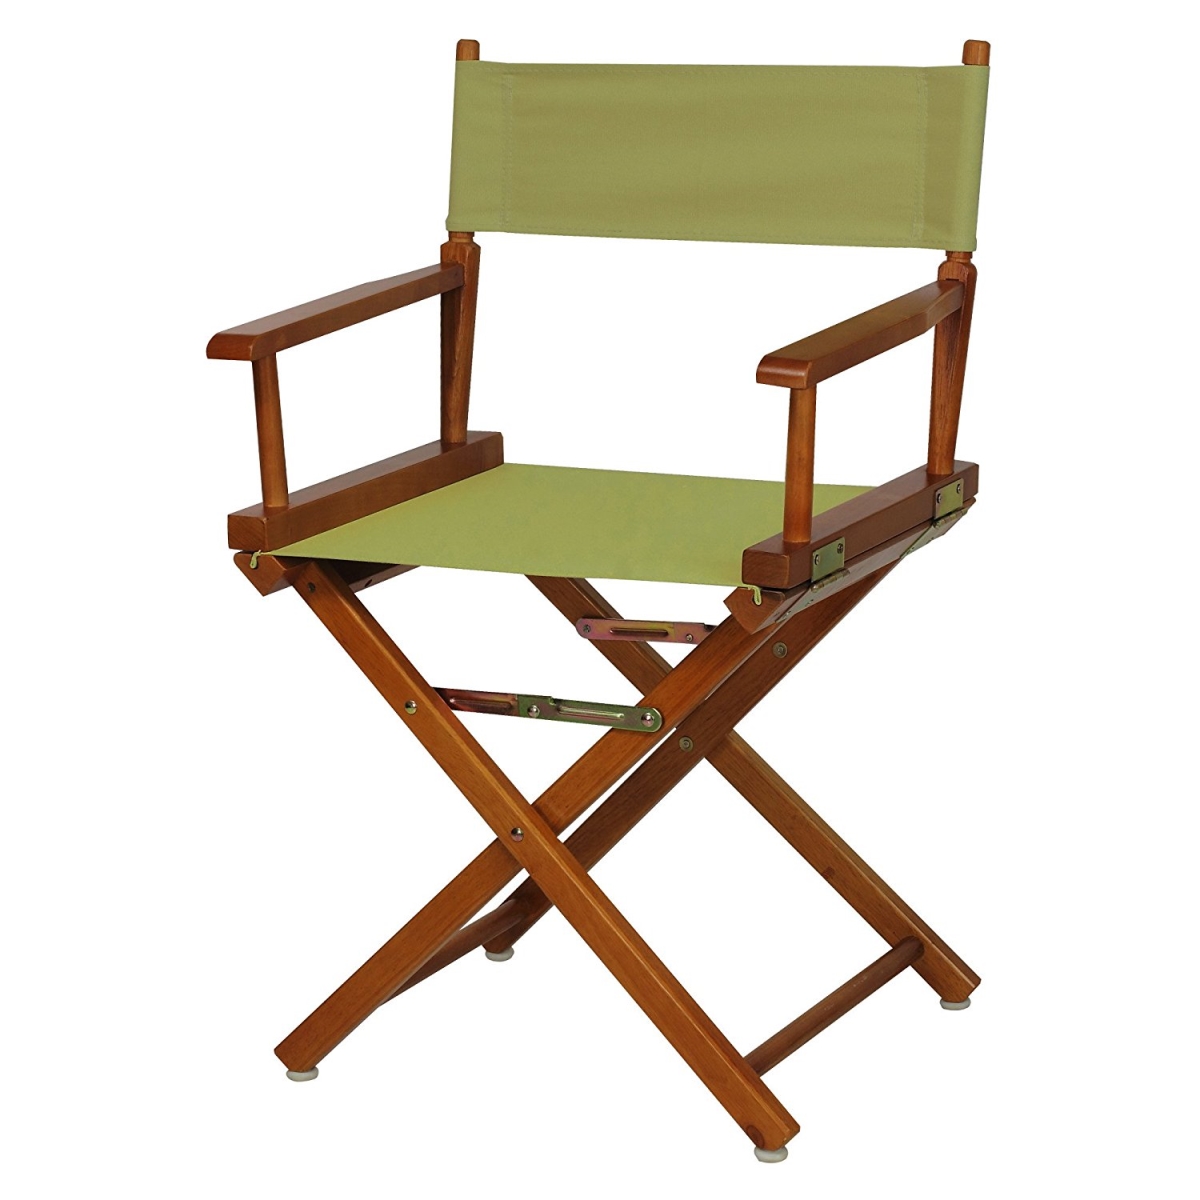 200-55-021-100 18 In. Directors Chair Honey Oak Frame With Olive Canvas